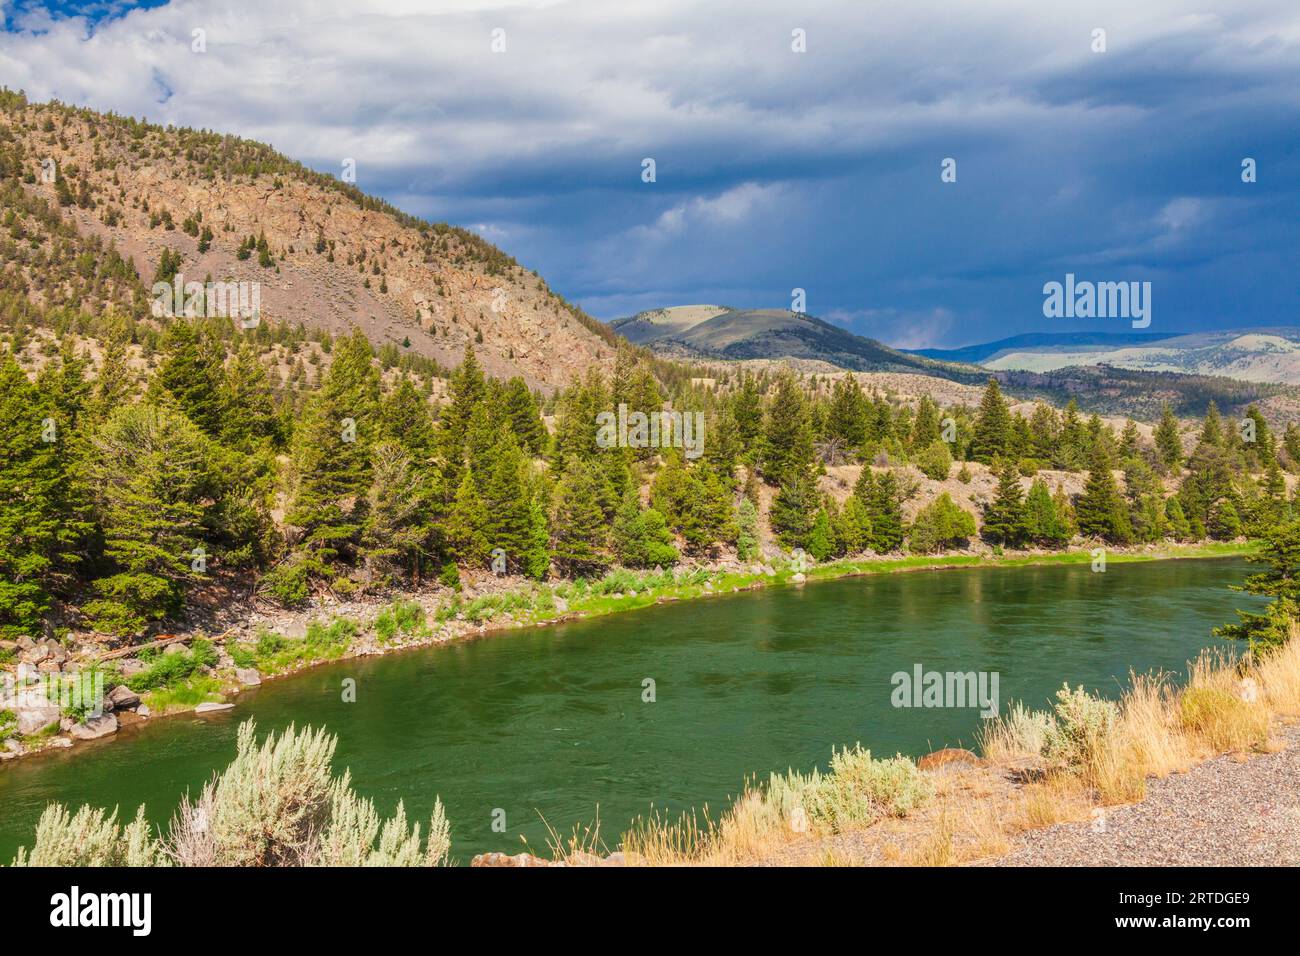 Yellowstone River along scenic highway US 89 in Montana. The Yellowstone river rises in northwestern Wyoming in the Absaroka Range. Stock Photo